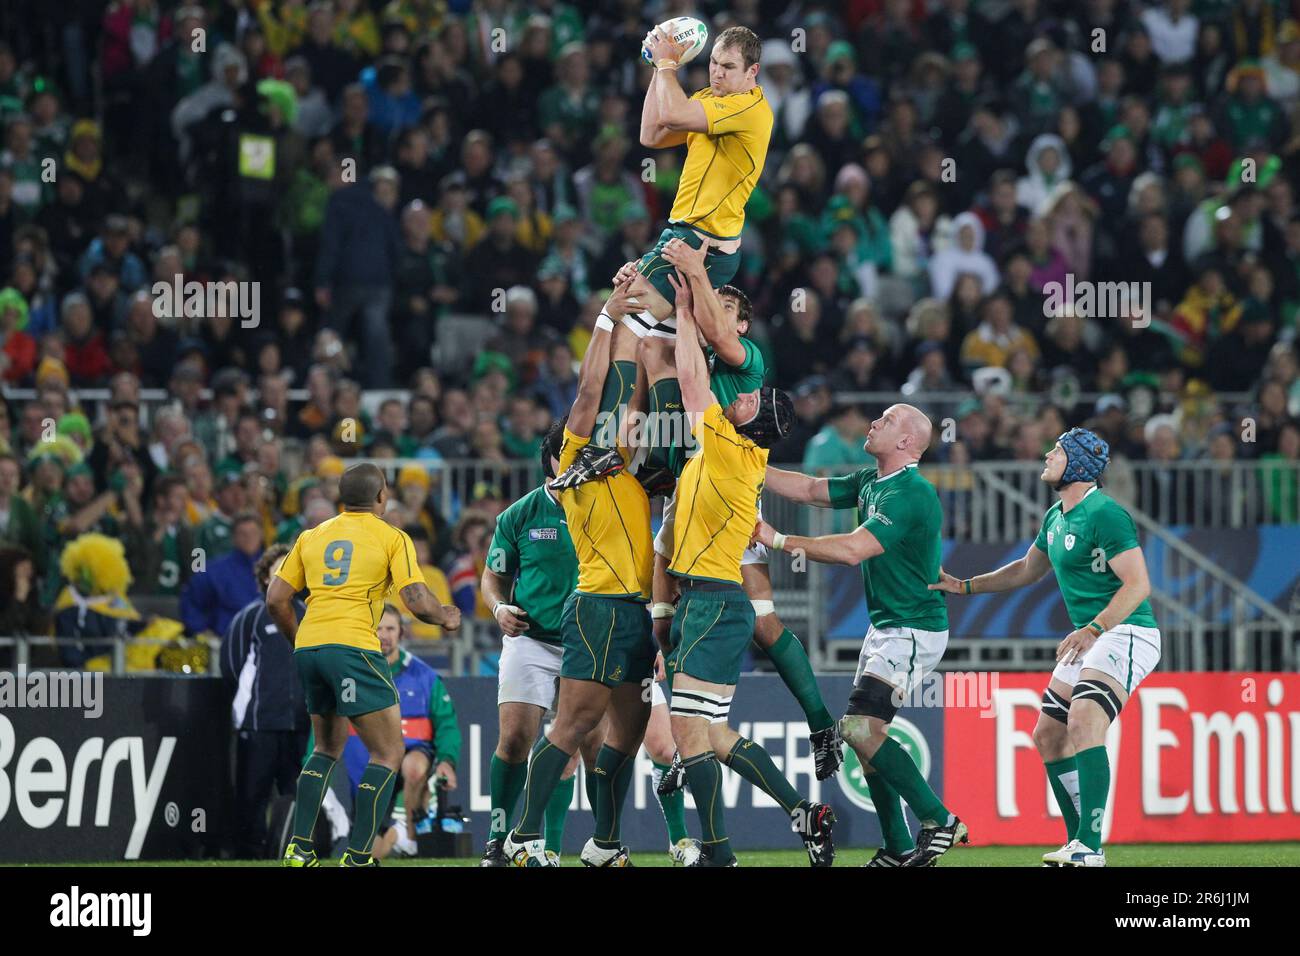 Australia’s Rocky Elsom wins a line out against Ireland during a Pool C match of the Rugby World Cup 2011, Eden Park, Auckland, New Zealand, Saturday, September 17, 2011. Stock Photo